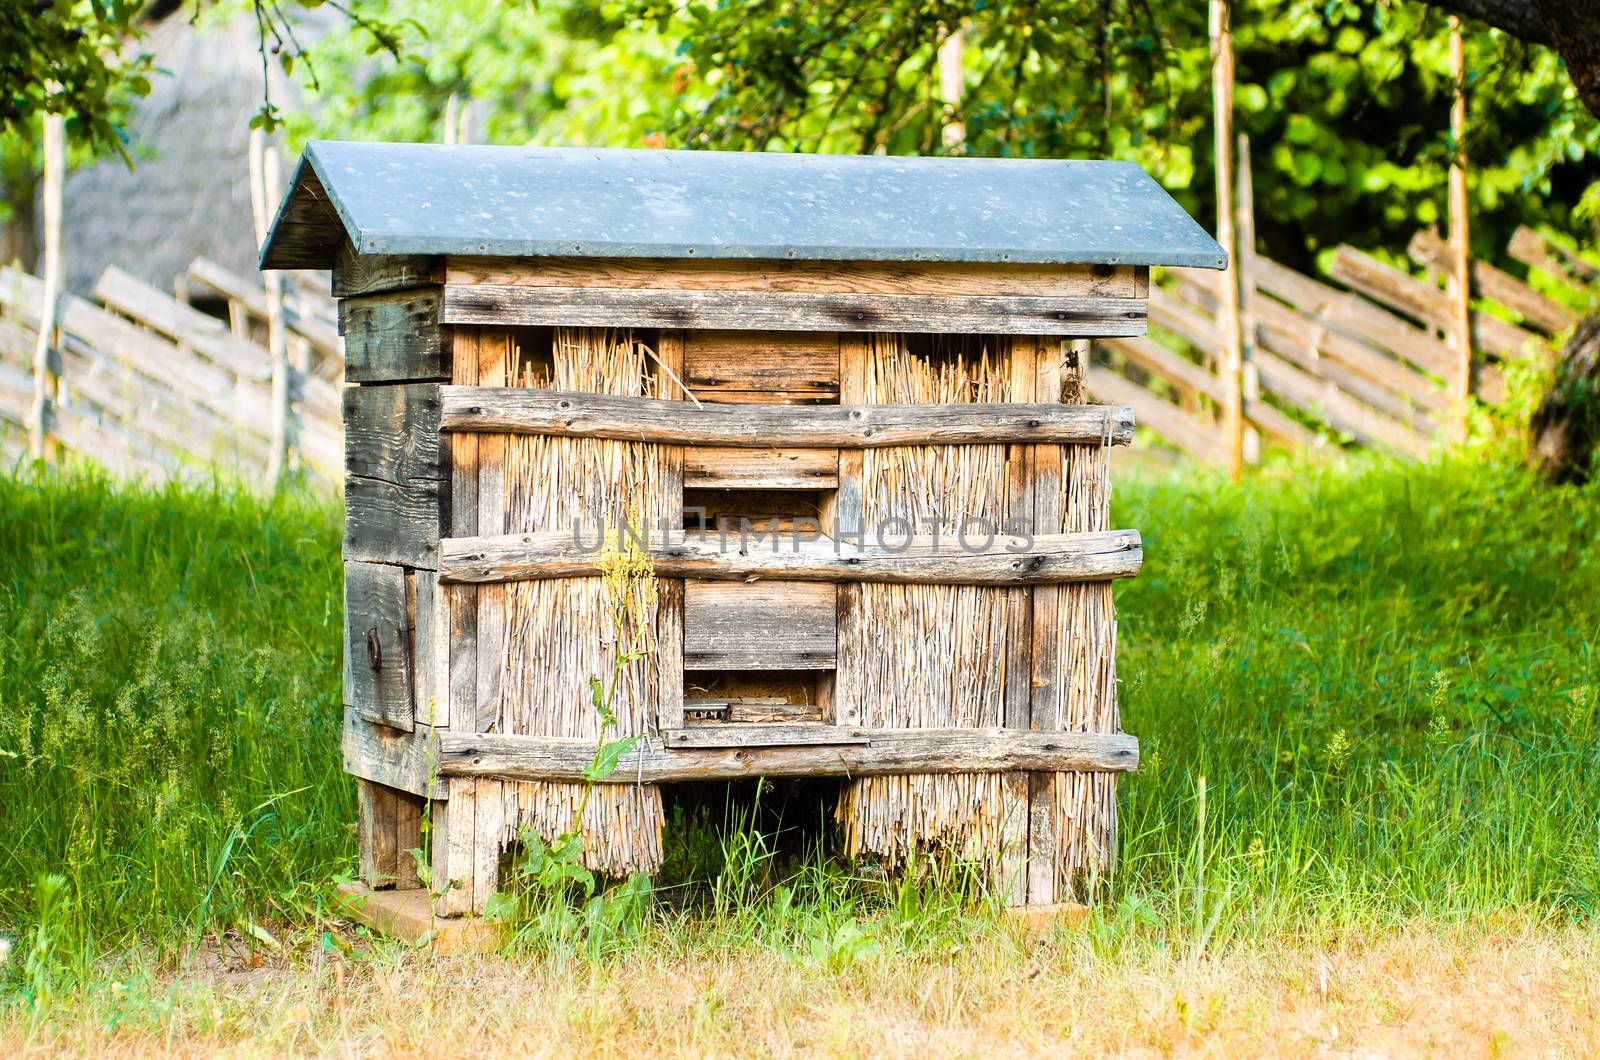 Traditional beehive from old times, made of wood. Old beehive in the apiary. Nature beehive beekeeping countryside honey